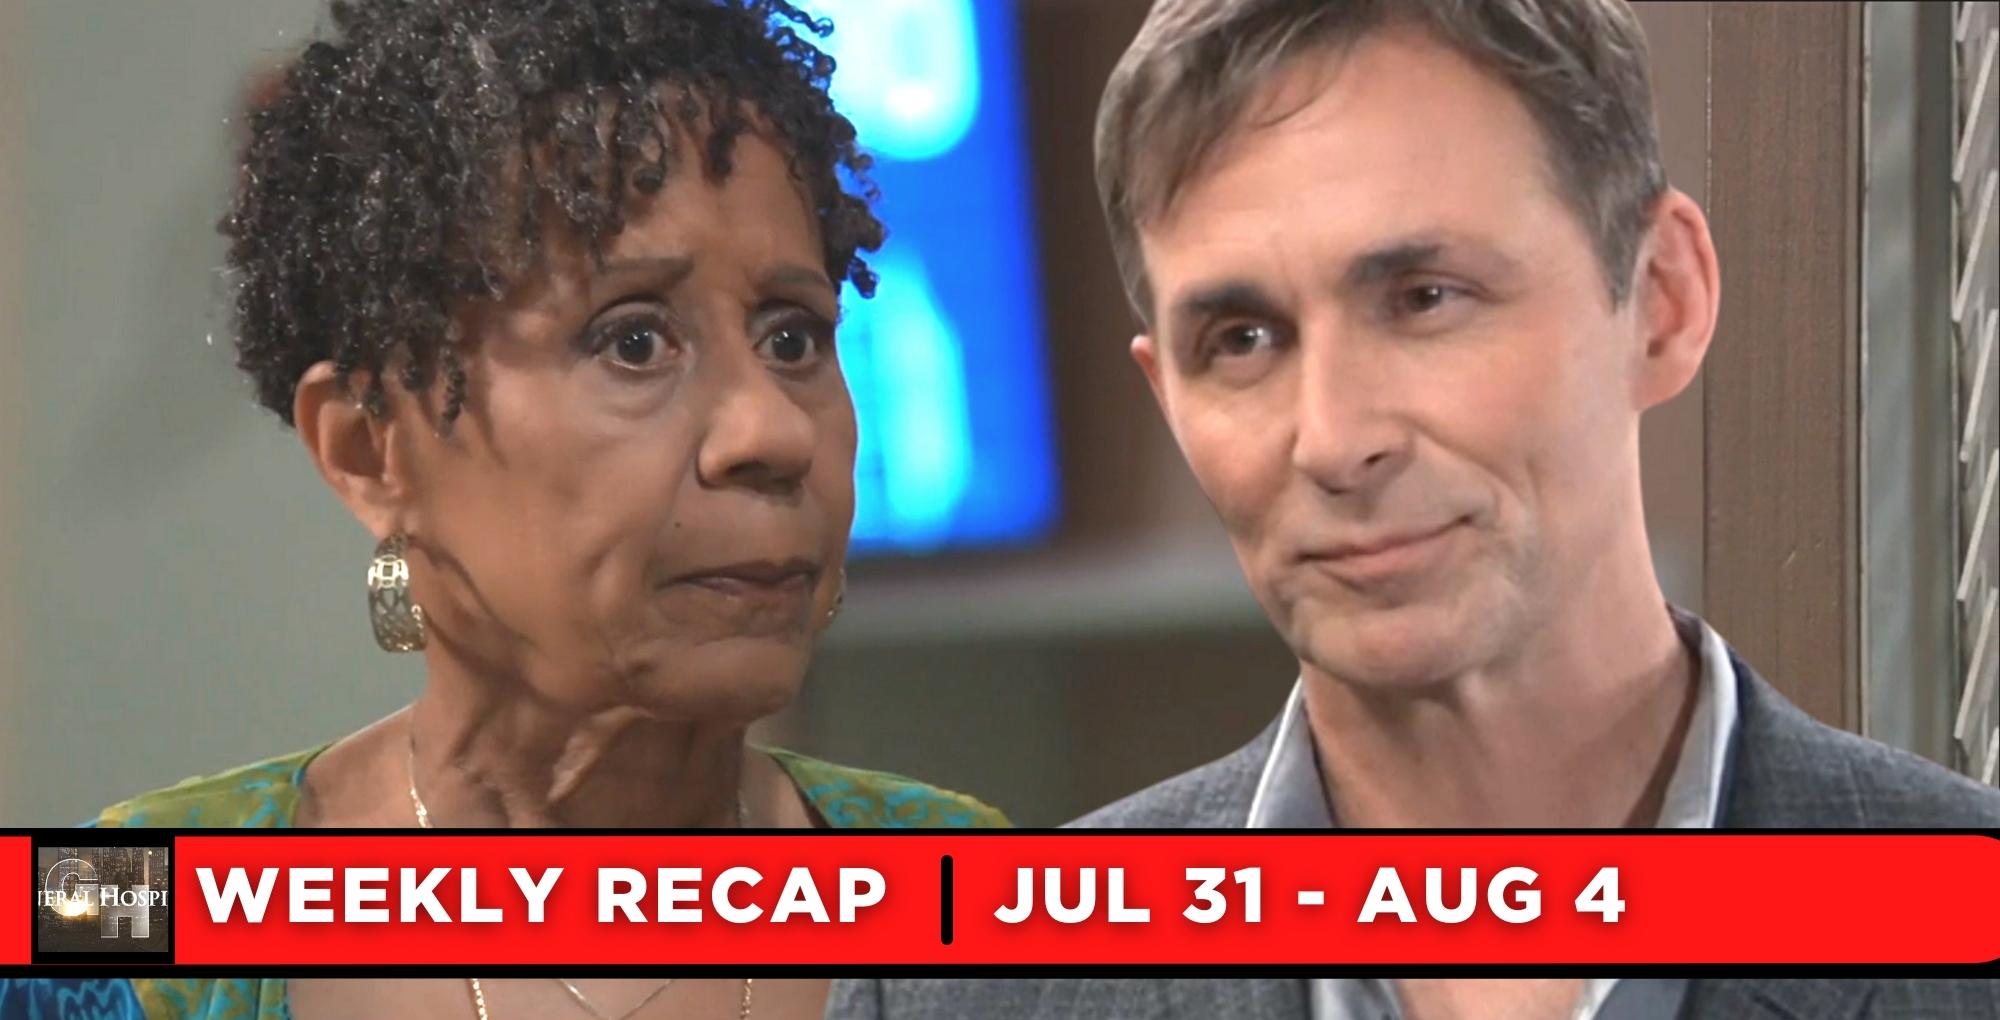 General Hospital Recaps Adventure, Danger & A Trip To The Other Side